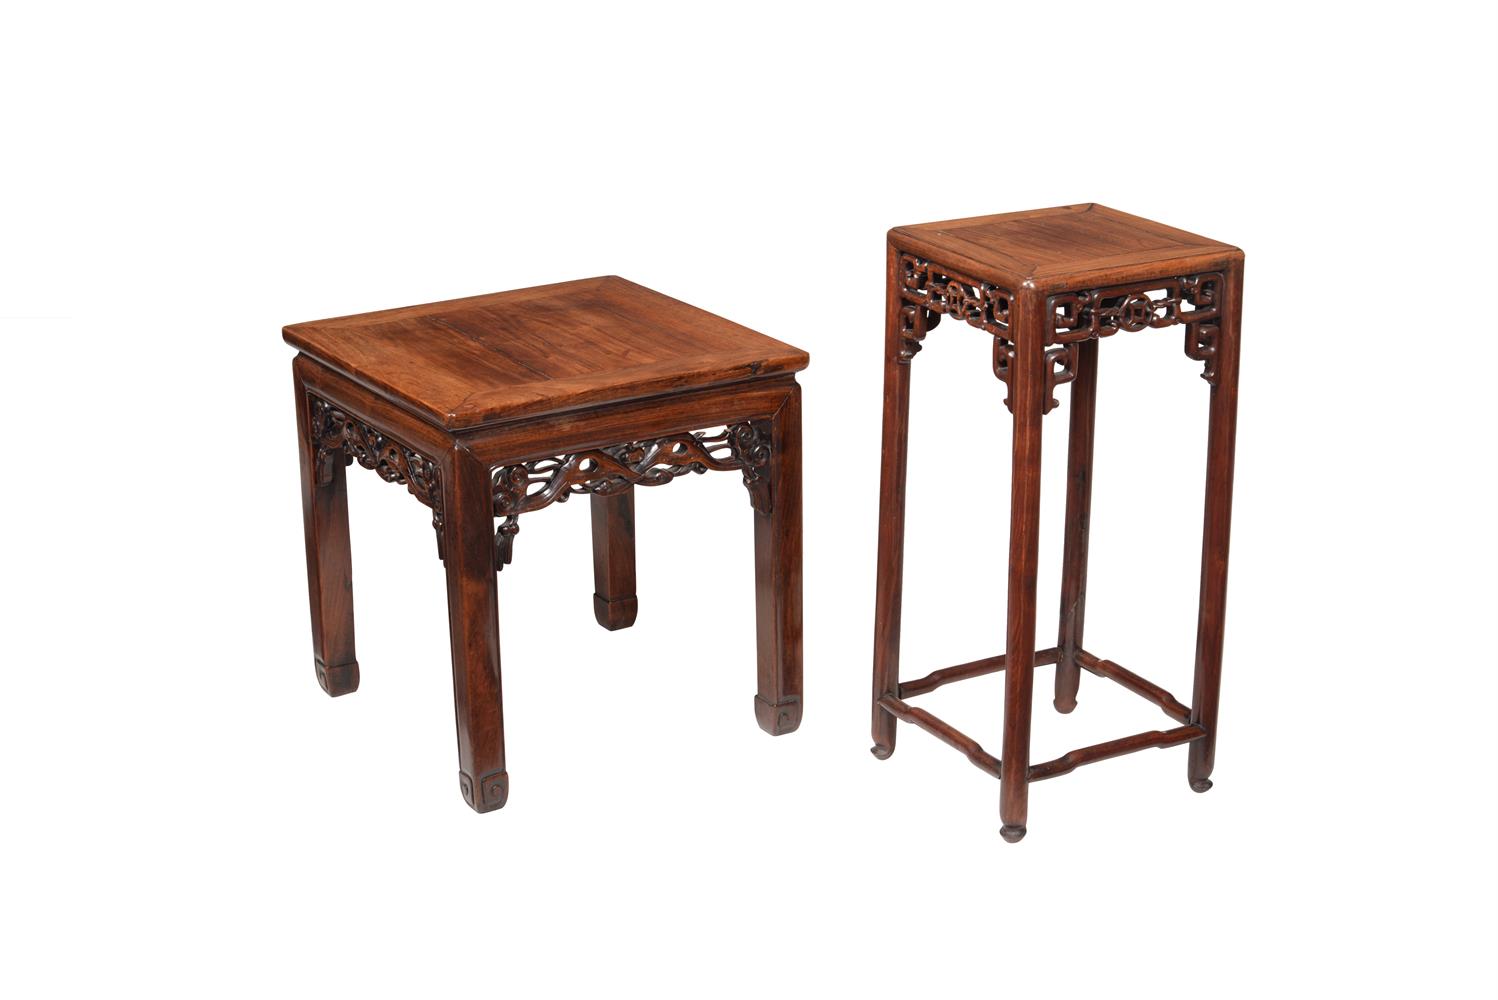 Two Chinese carved hardwood stands or occasional tables